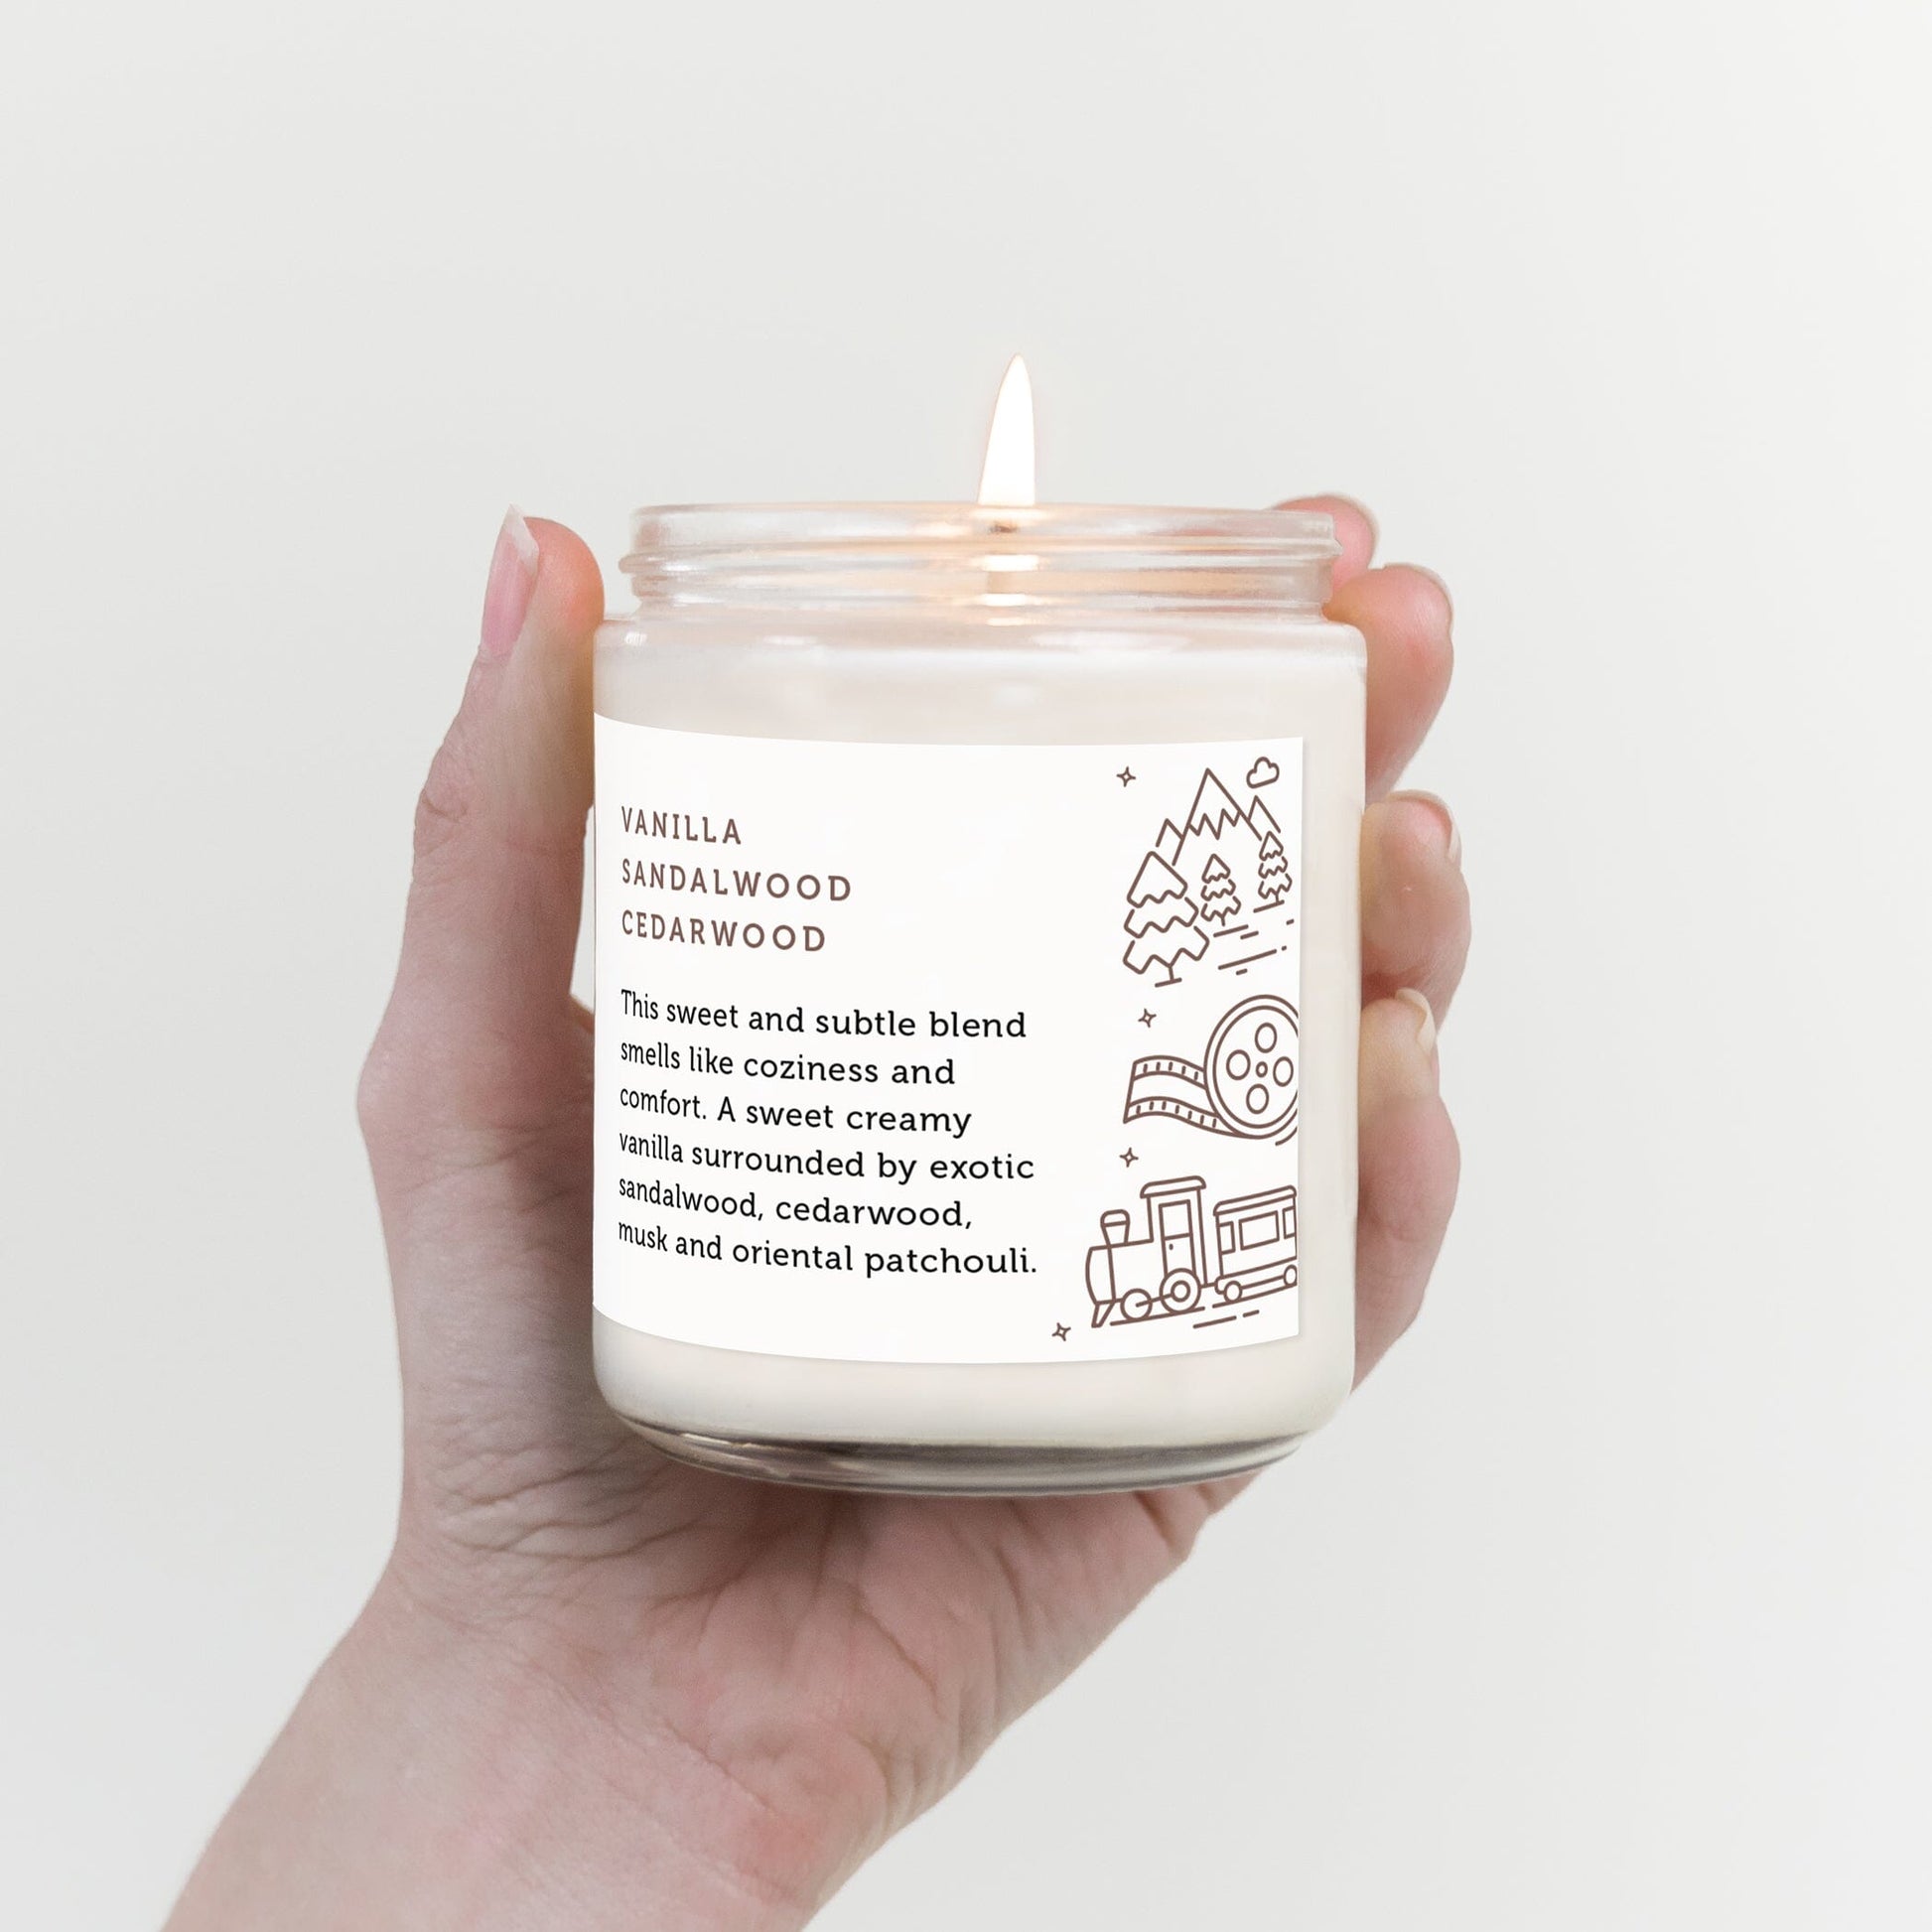 Evermore Candle Candles CE Craft 